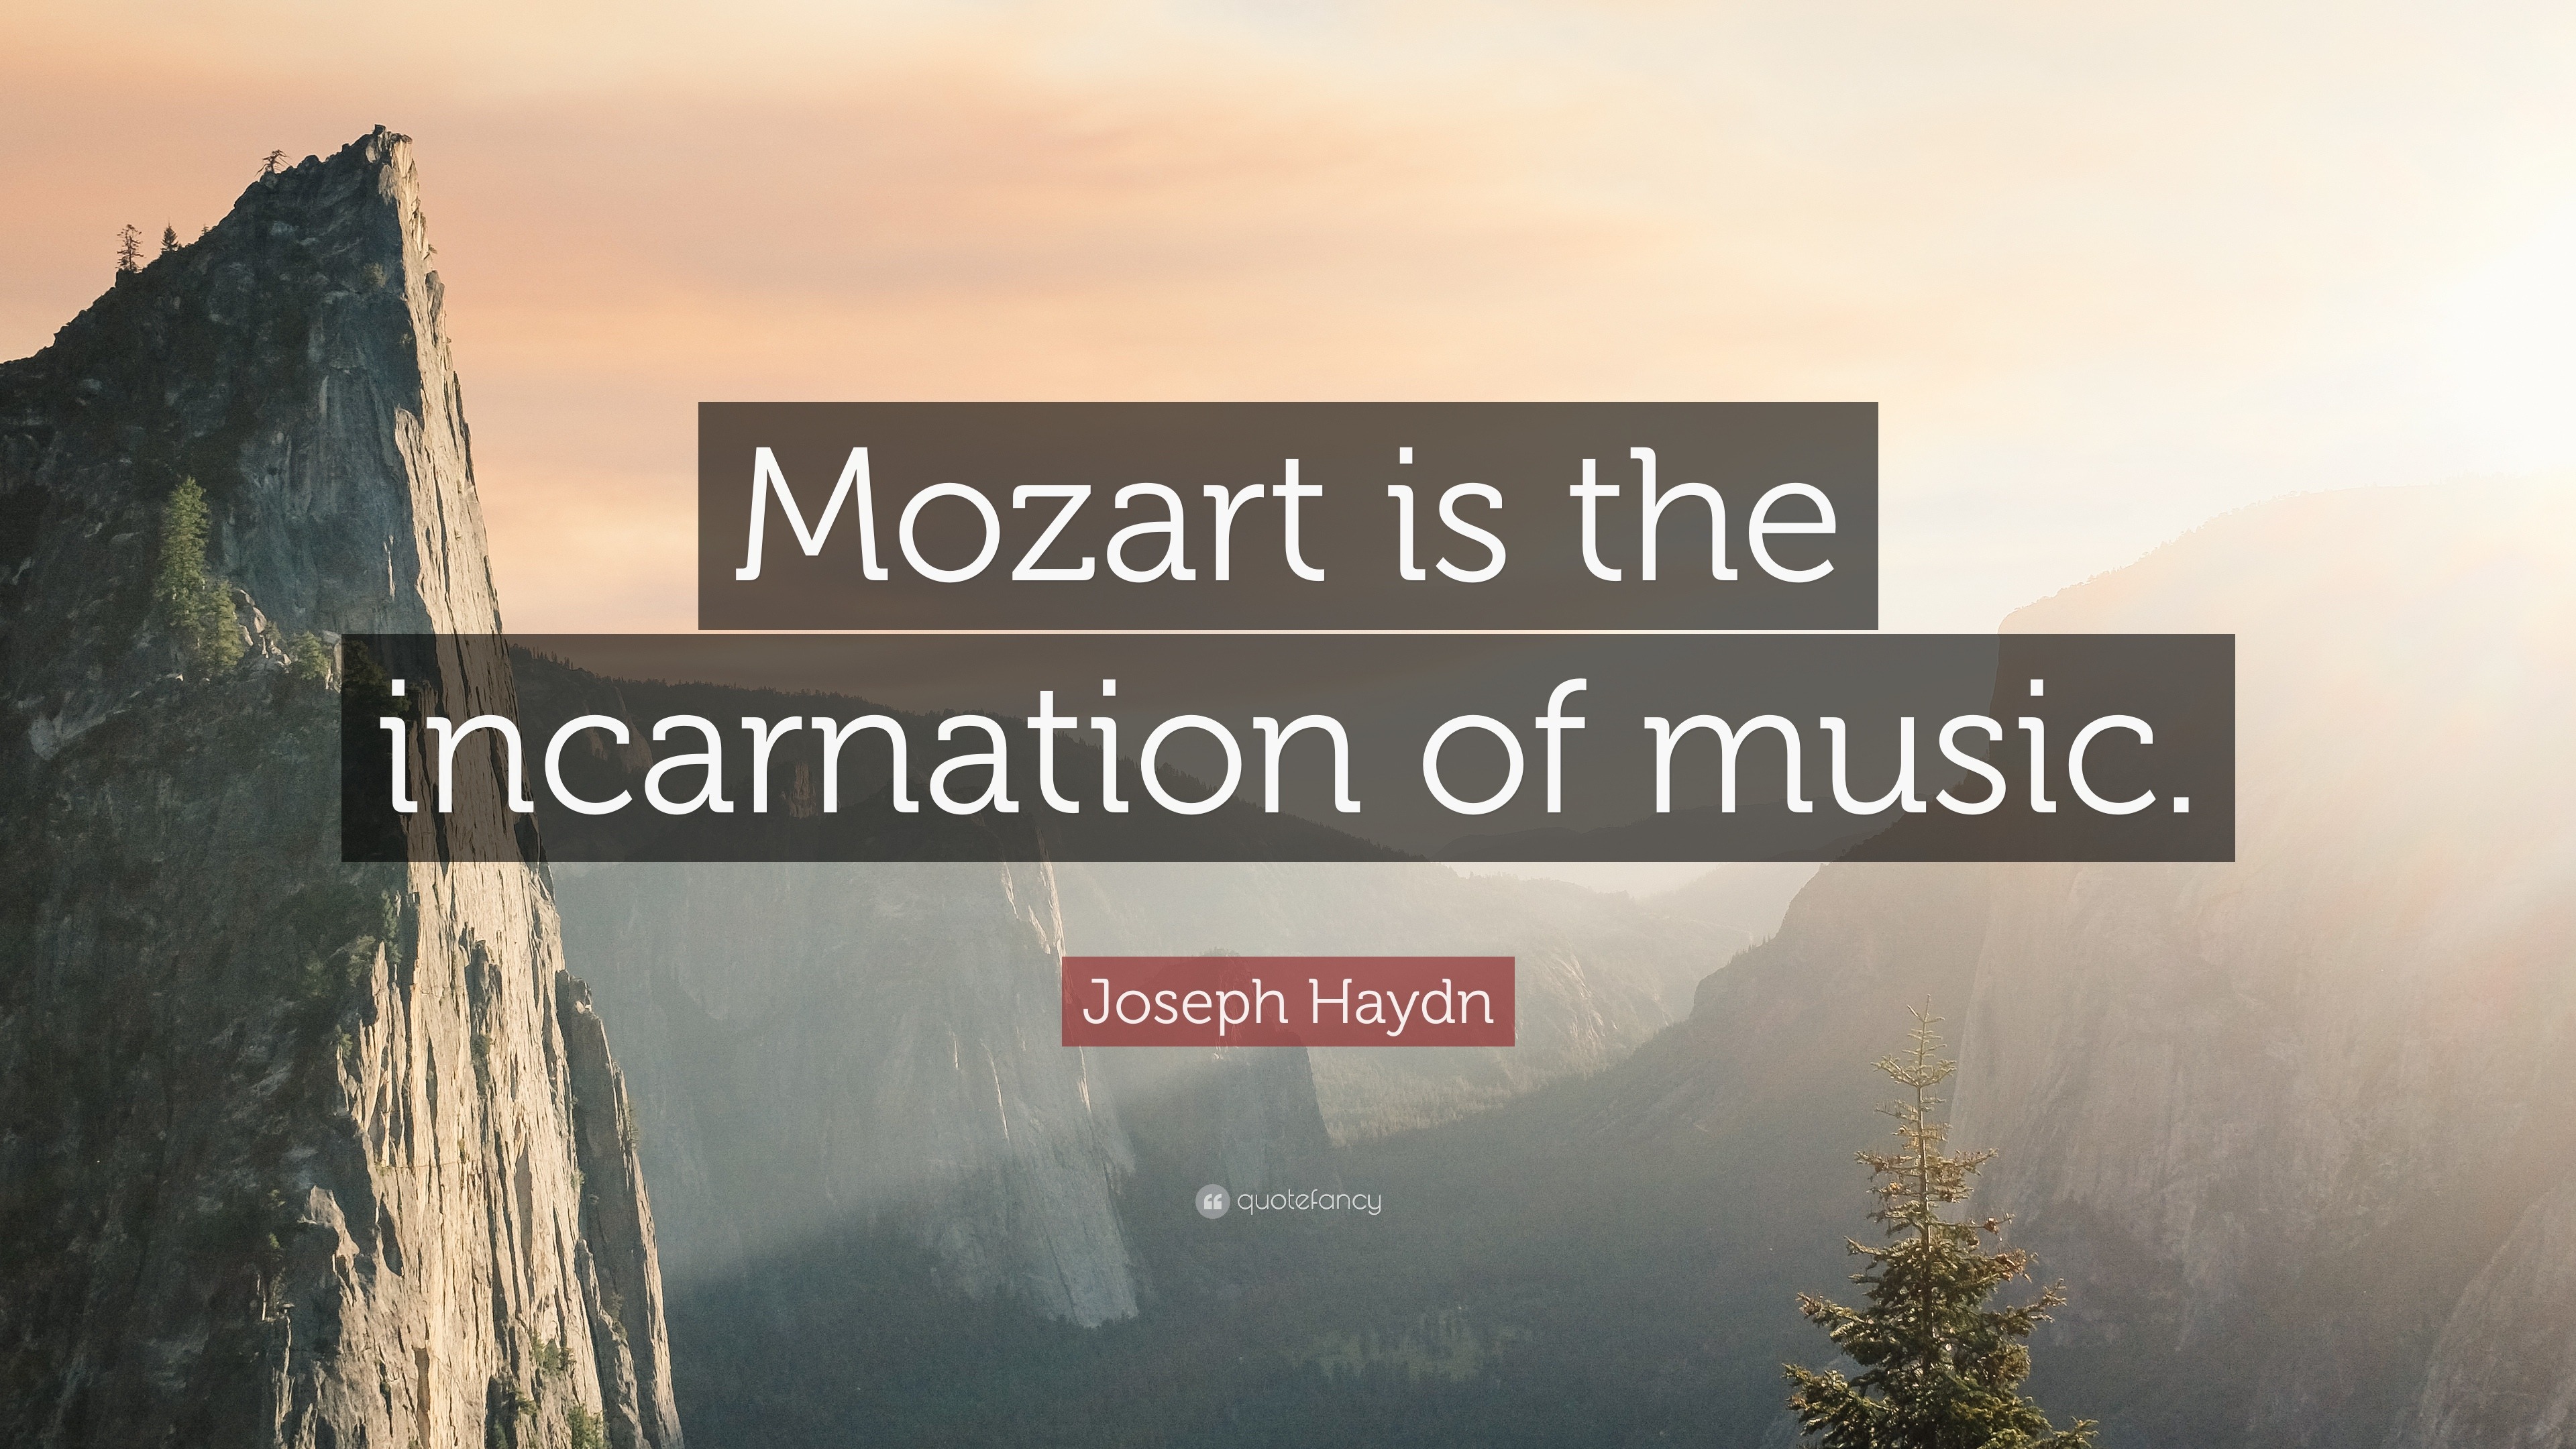 Joseph Haydn Quote: “Mozart is the incarnation of music.”